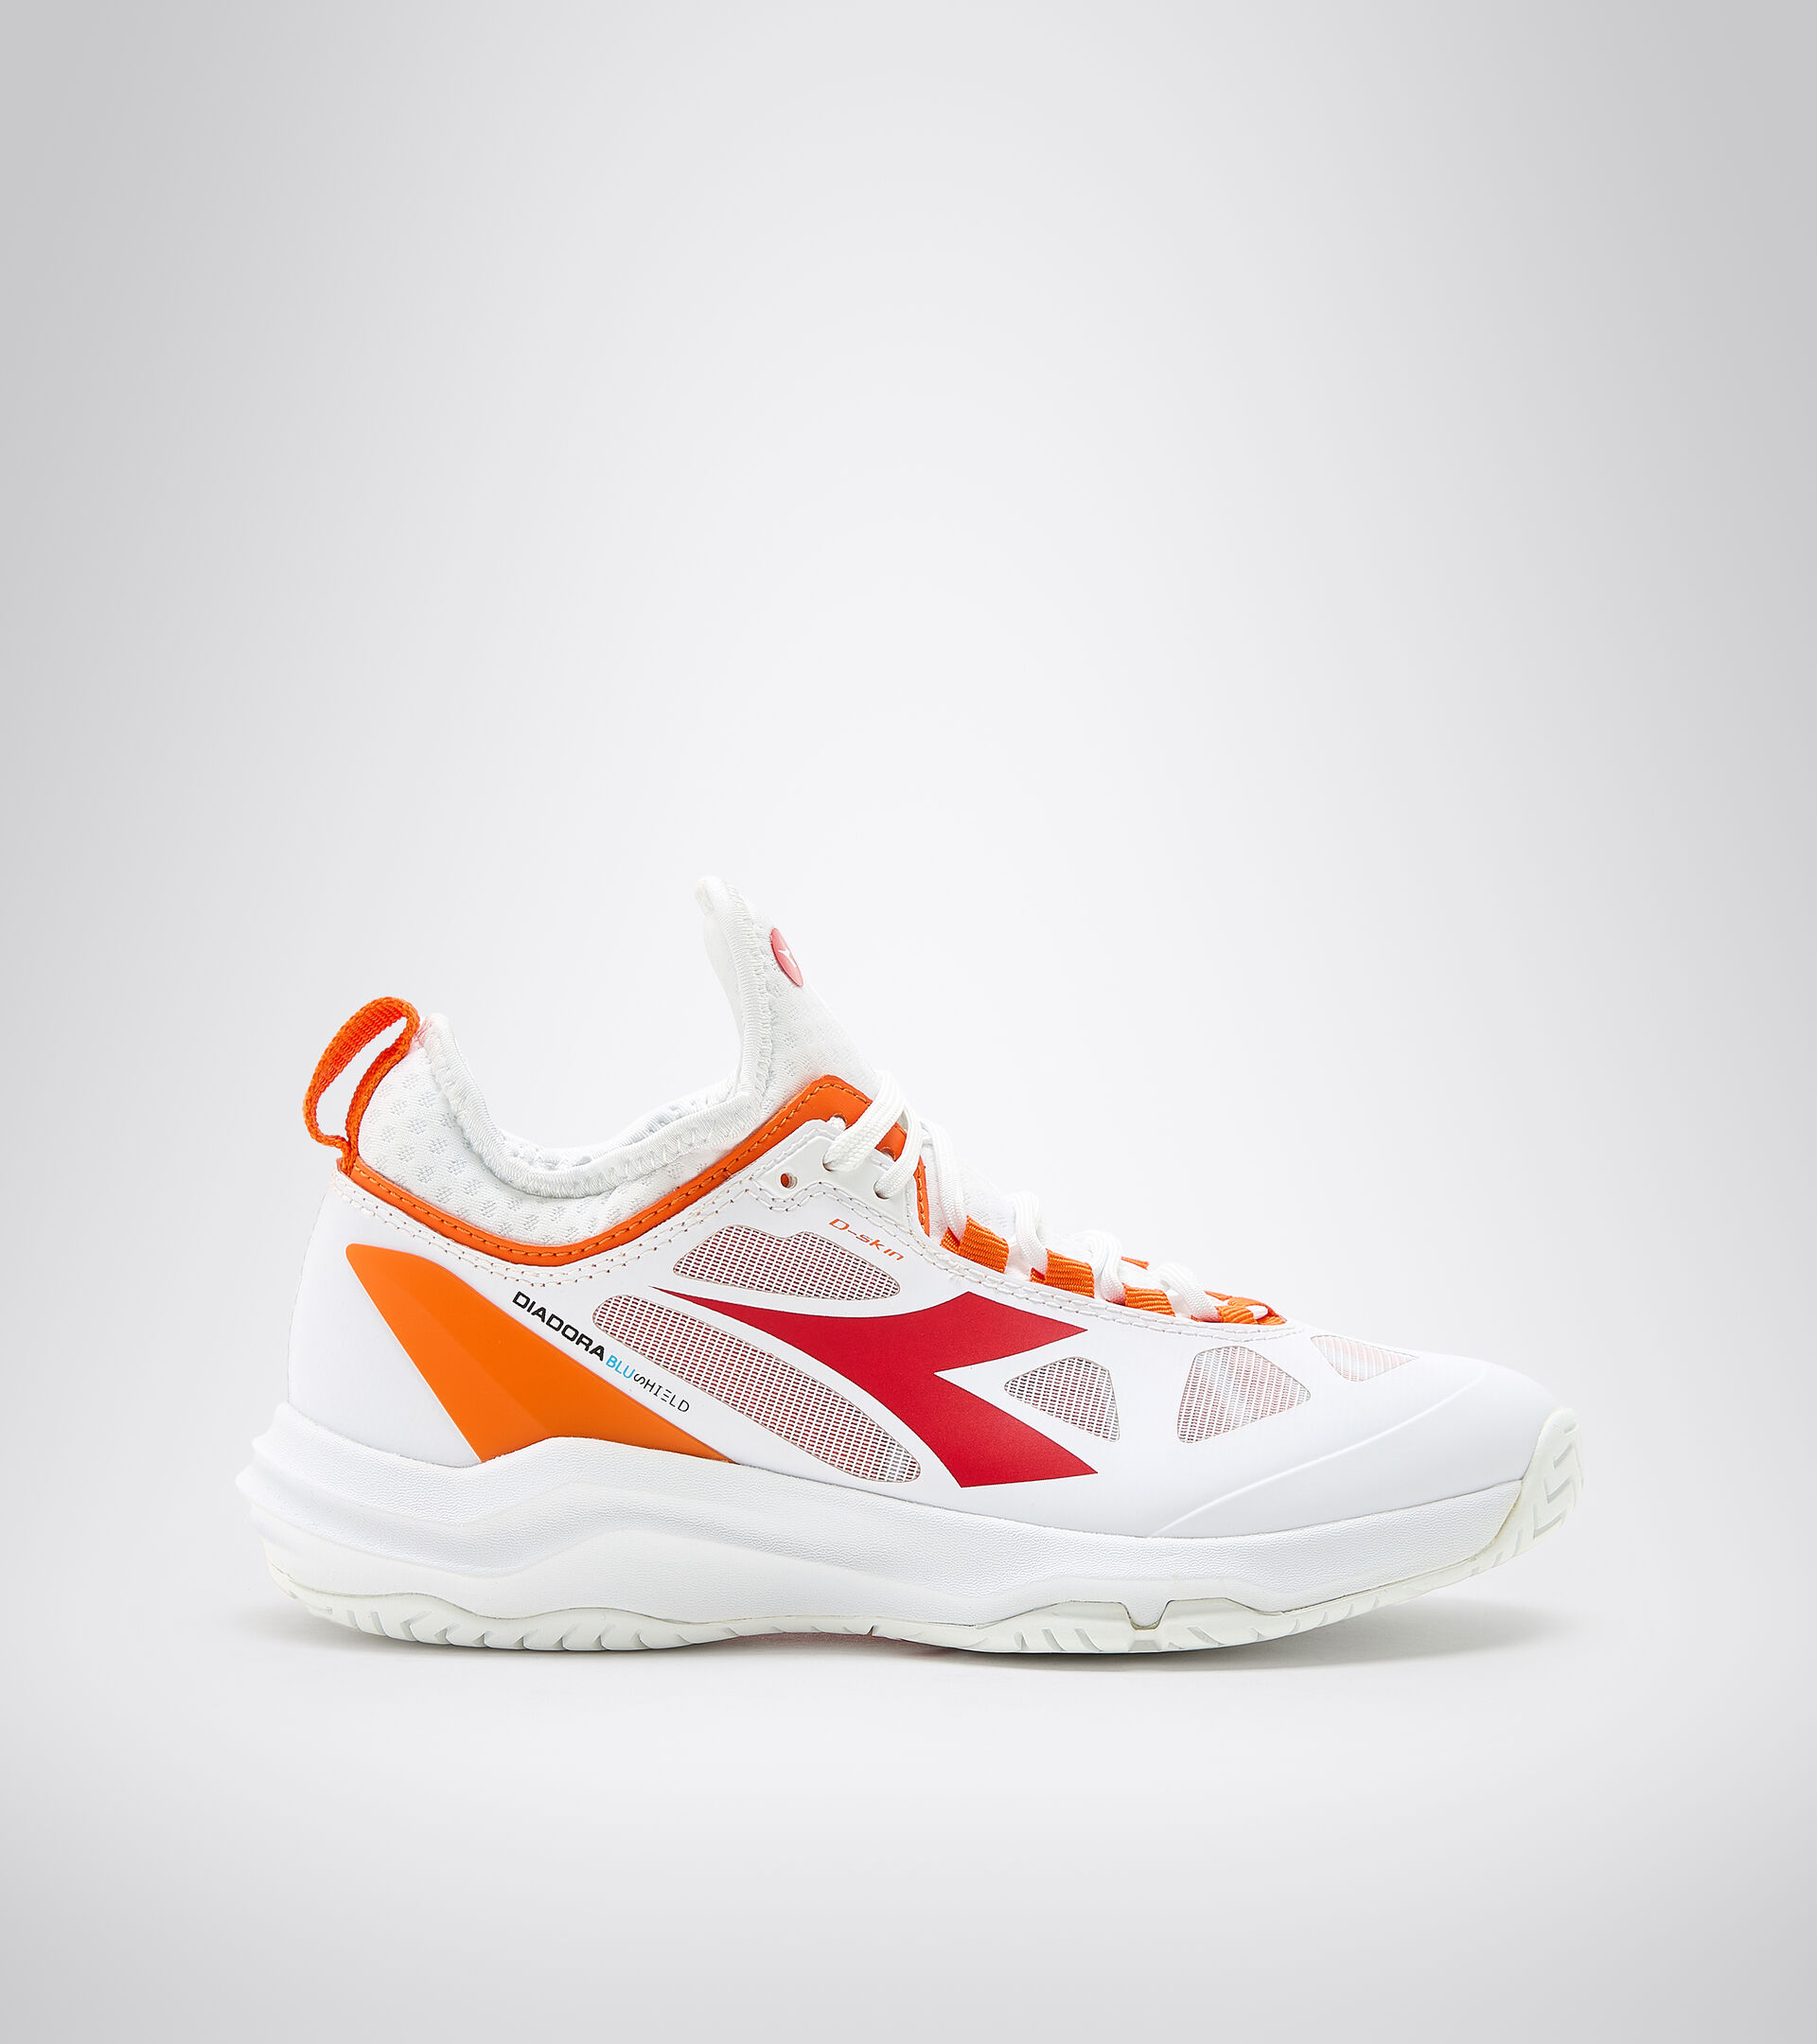 Clay and hard court tennis shoe - Women SPEED BLUSHIELD FLY 3 + W AG WHITE/FIERY RED - Diadora